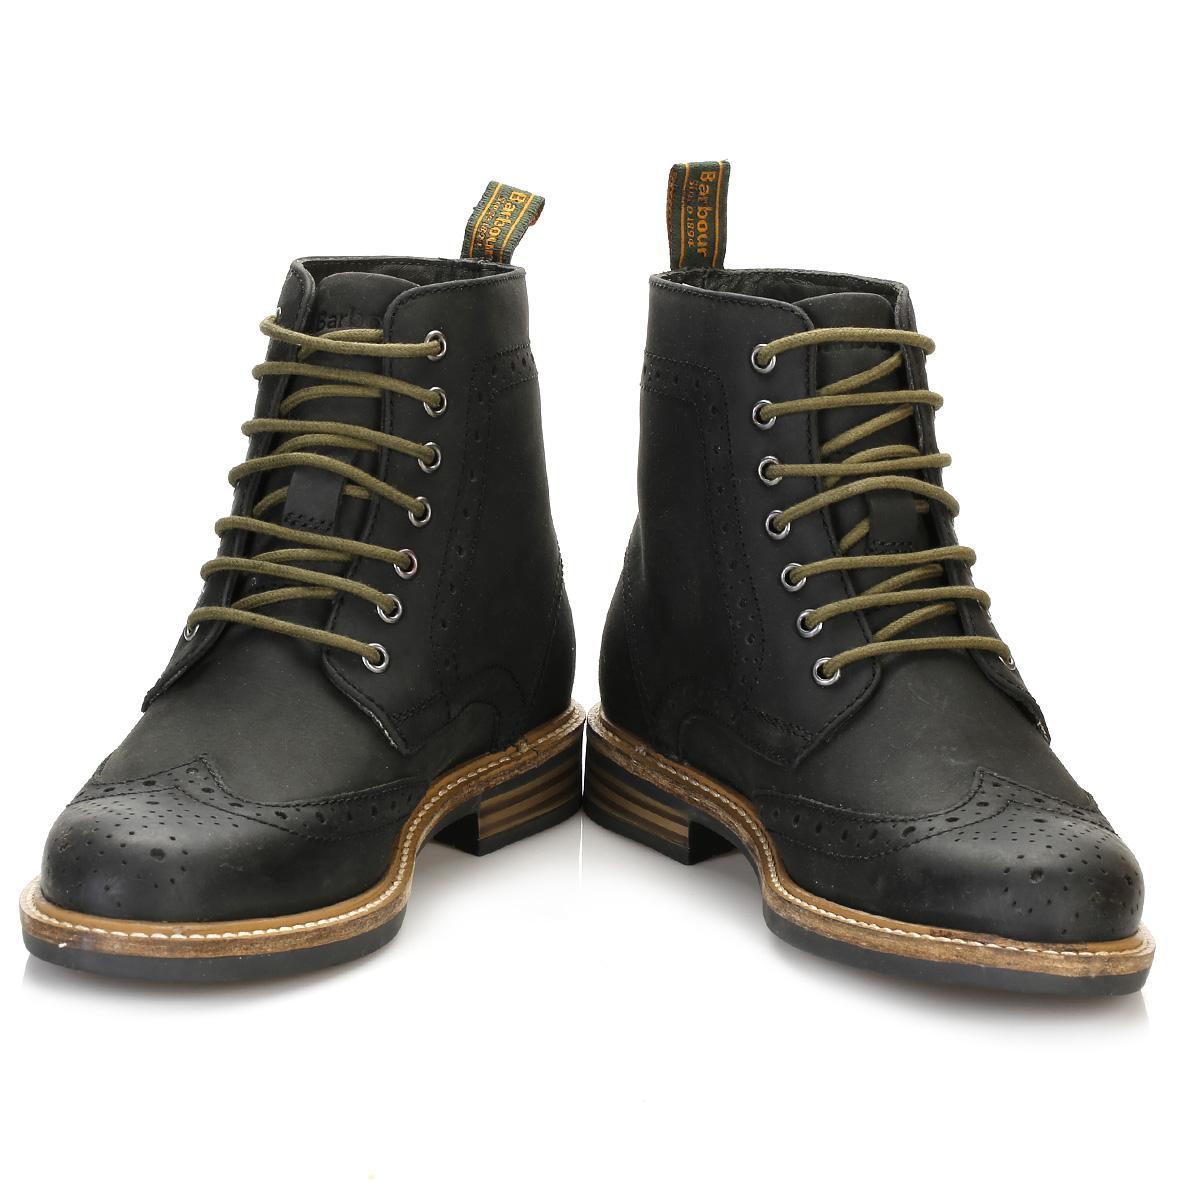 mens barbour brogue boots Cheaper Than Retail Price> Buy Clothing,  Accessories and lifestyle products for women & men -